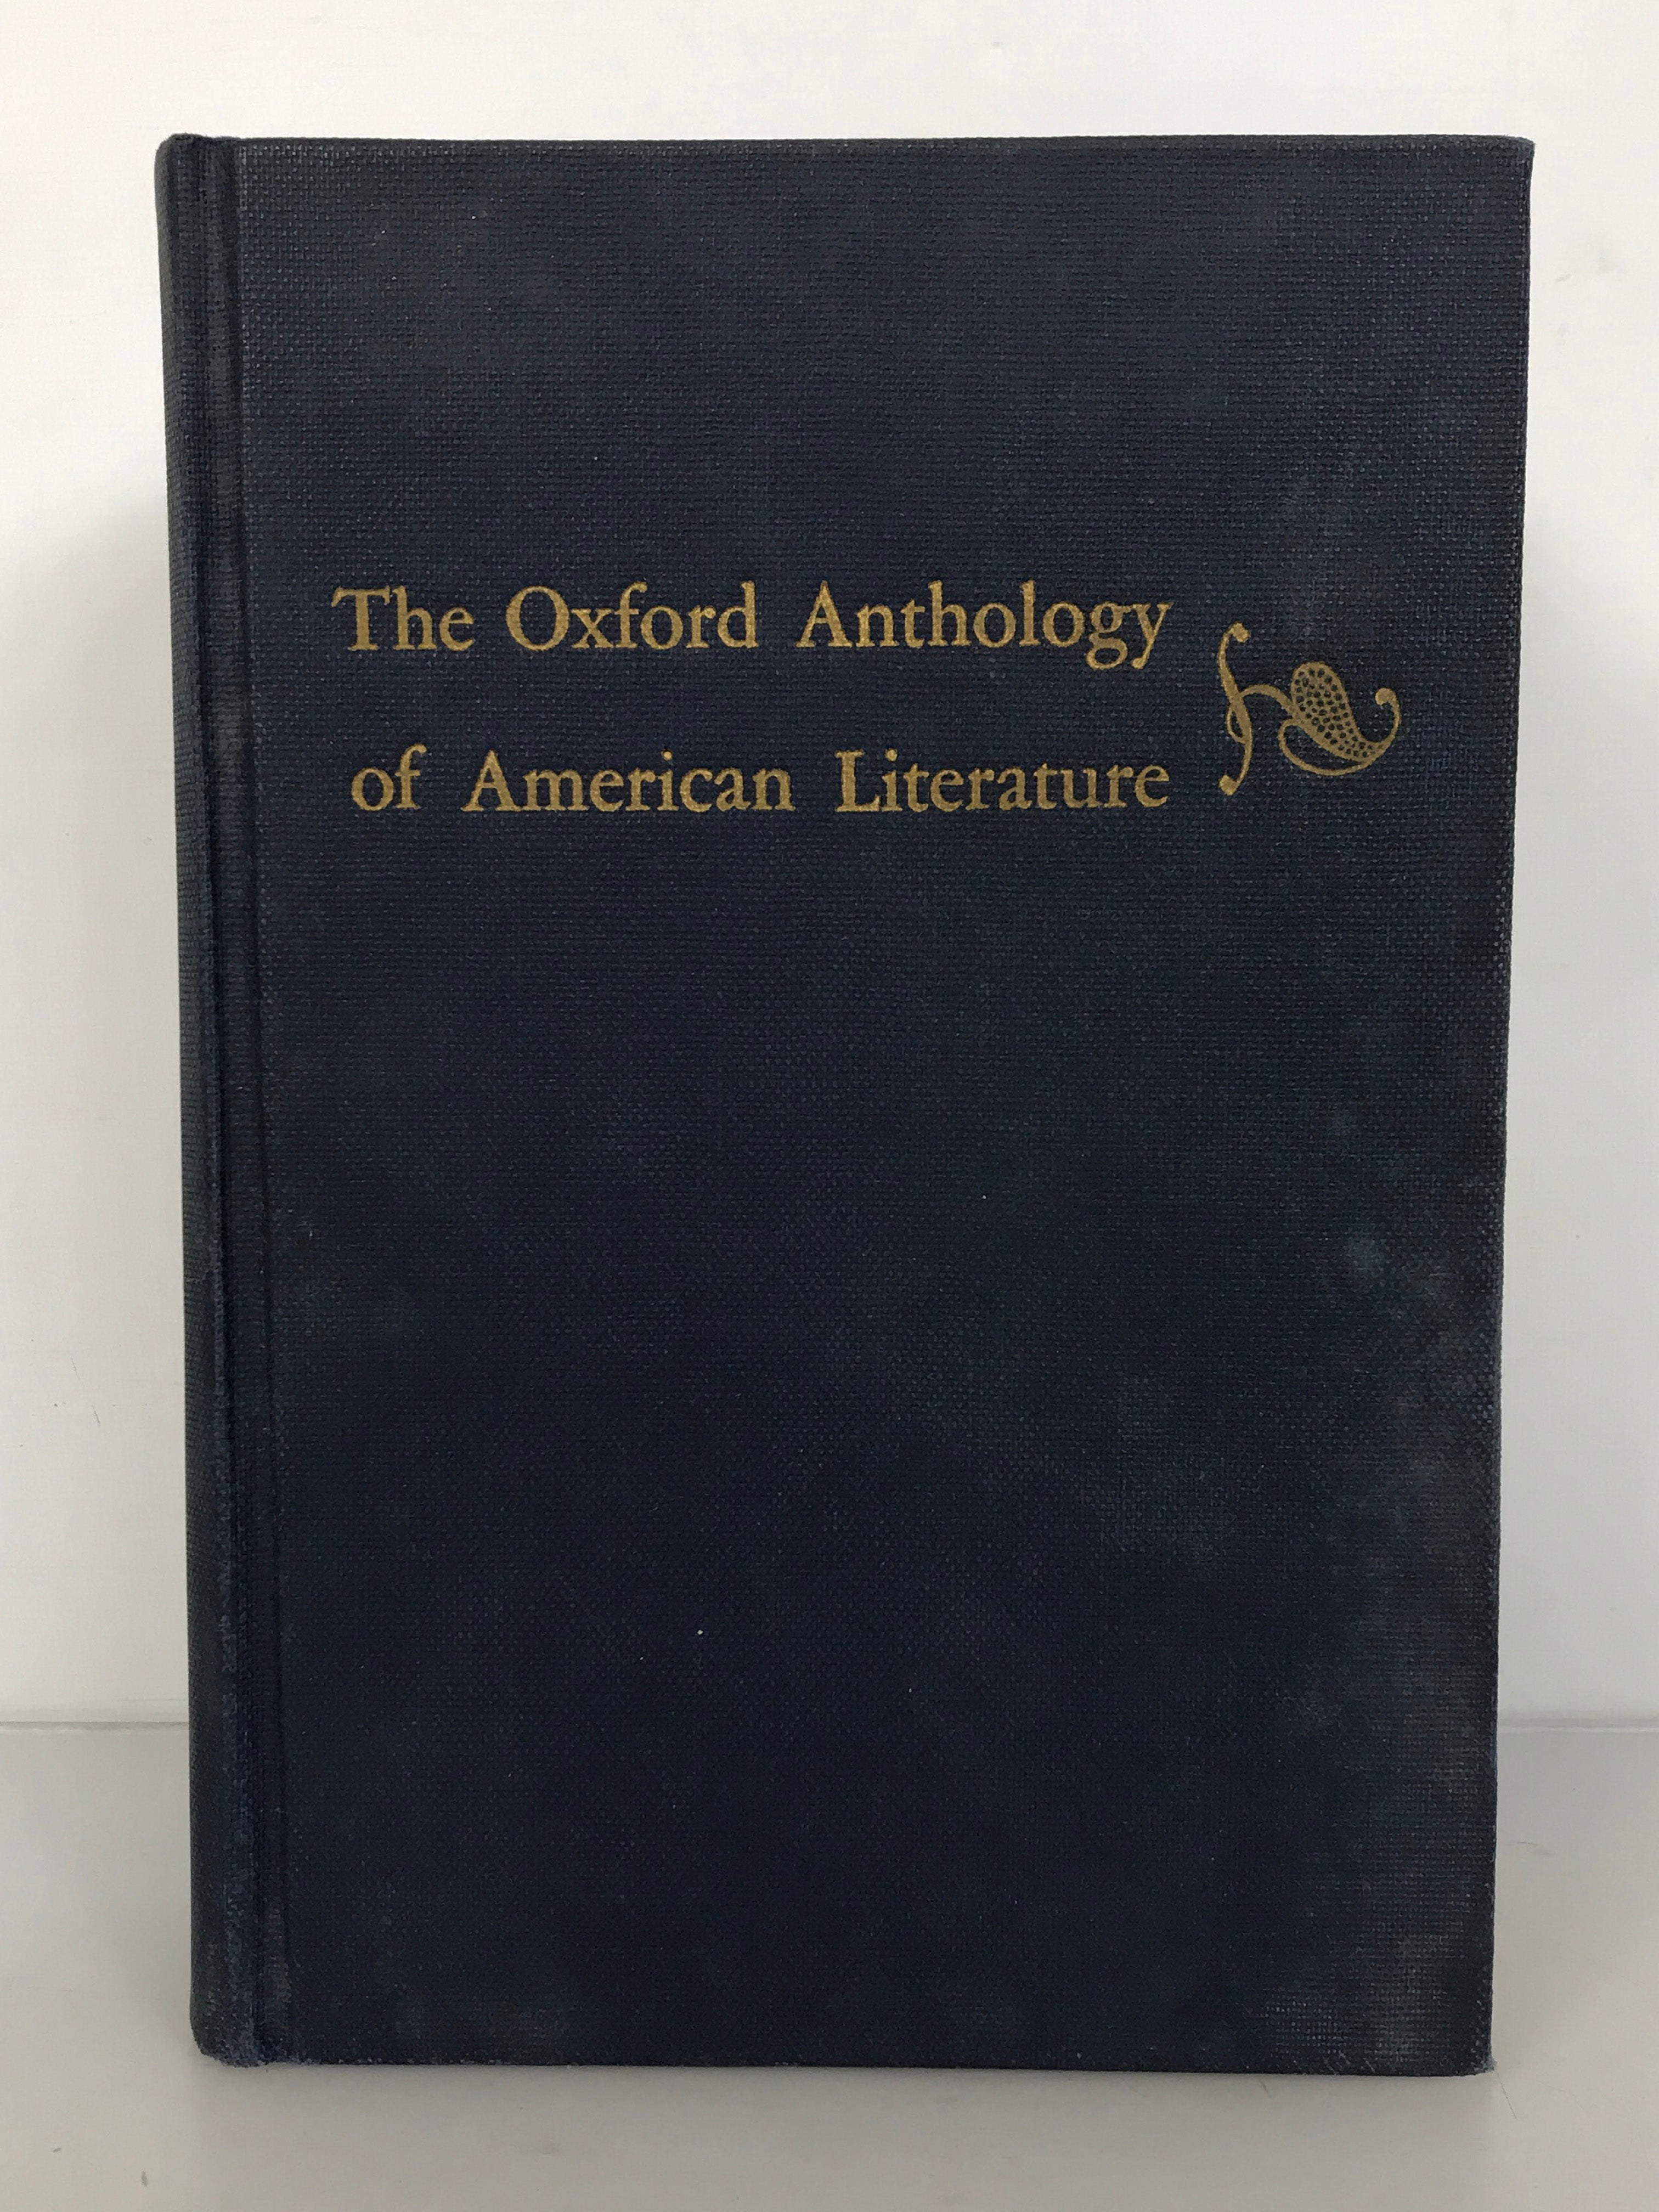 The Oxford Anthology of American Literature Benet and Pearson 1945 HC